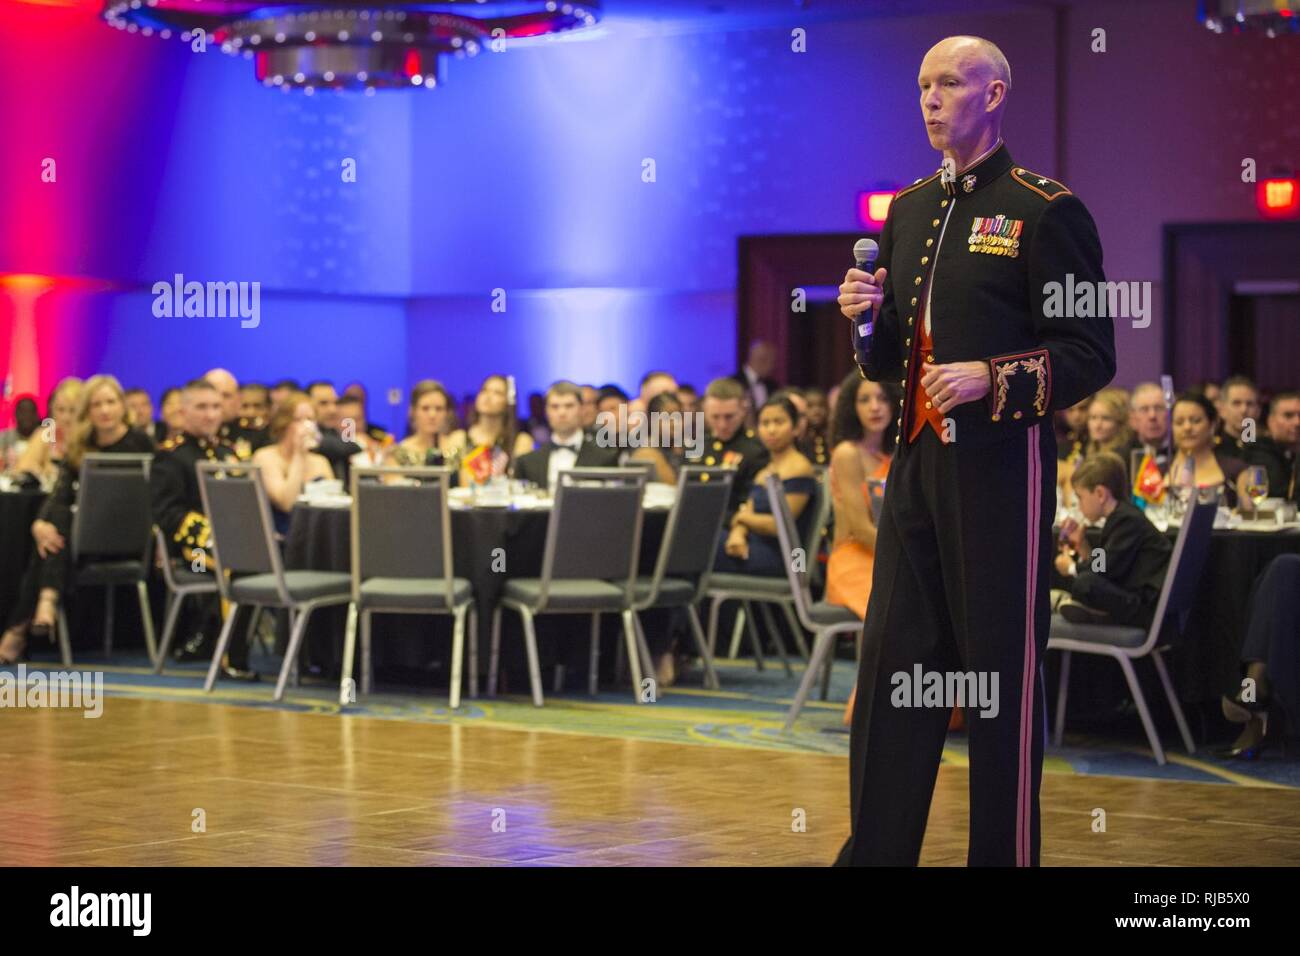 U.S. Marine Corps Brig. Gen. James F. Glynn, director, Office of United State Marine Corps Communication, gives remarks during the Headquarters & Service Battalion Marine Corps Ball at the Renaissance Arlington Capitol View Hotel, Arlington, Va., Nov. 05, 2016. The ball was held in celebration of the Marine Corps’ 241st birthday. Stock Photo